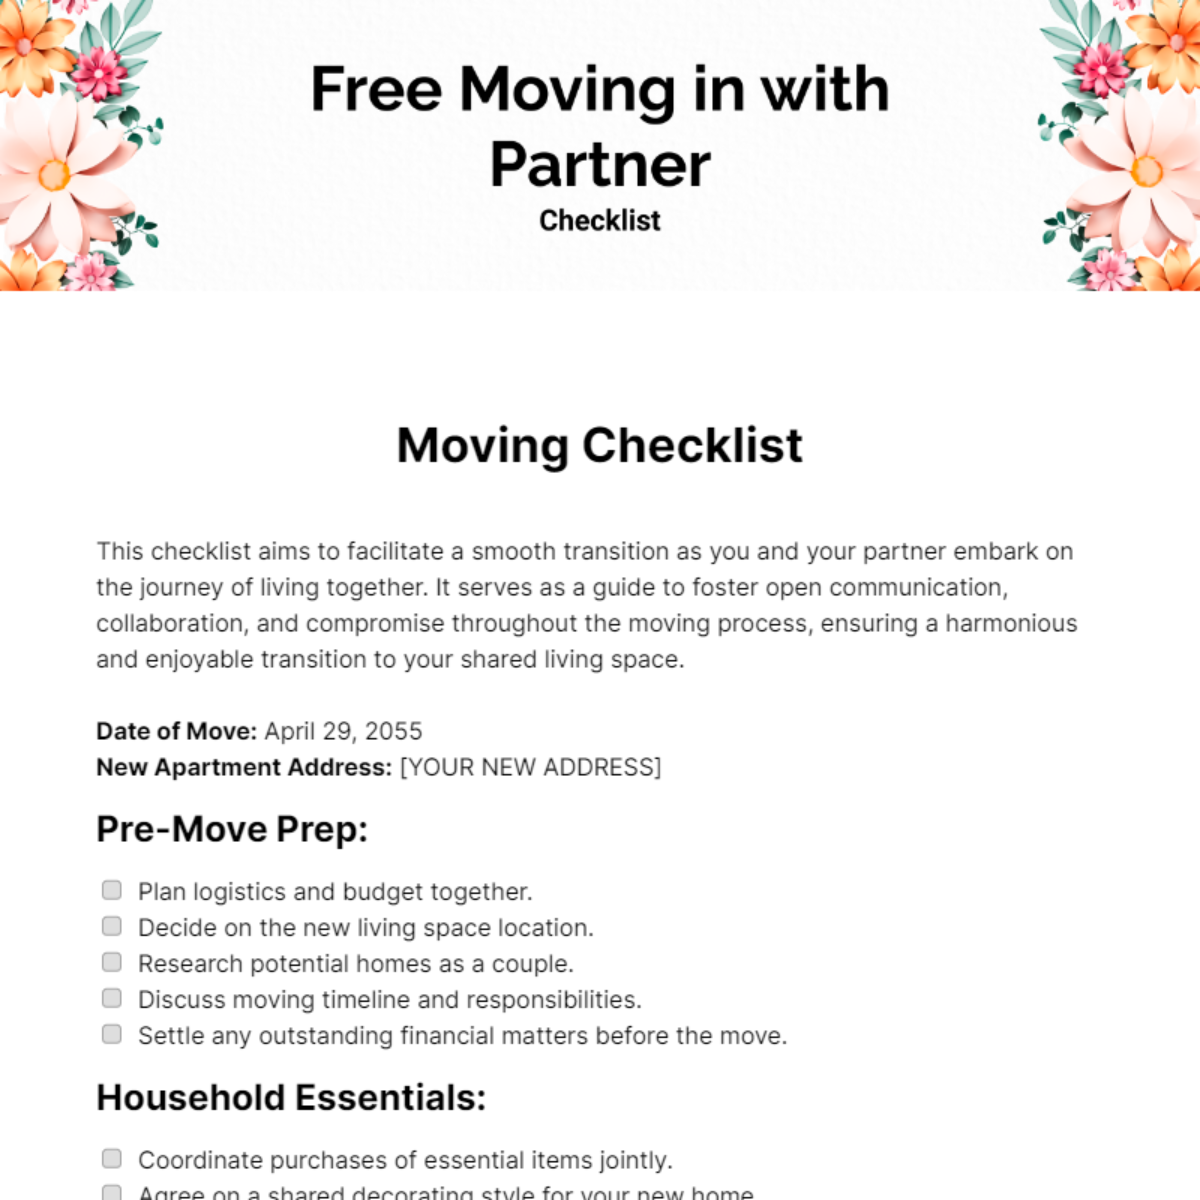 Moving in with Partner Checklist Template